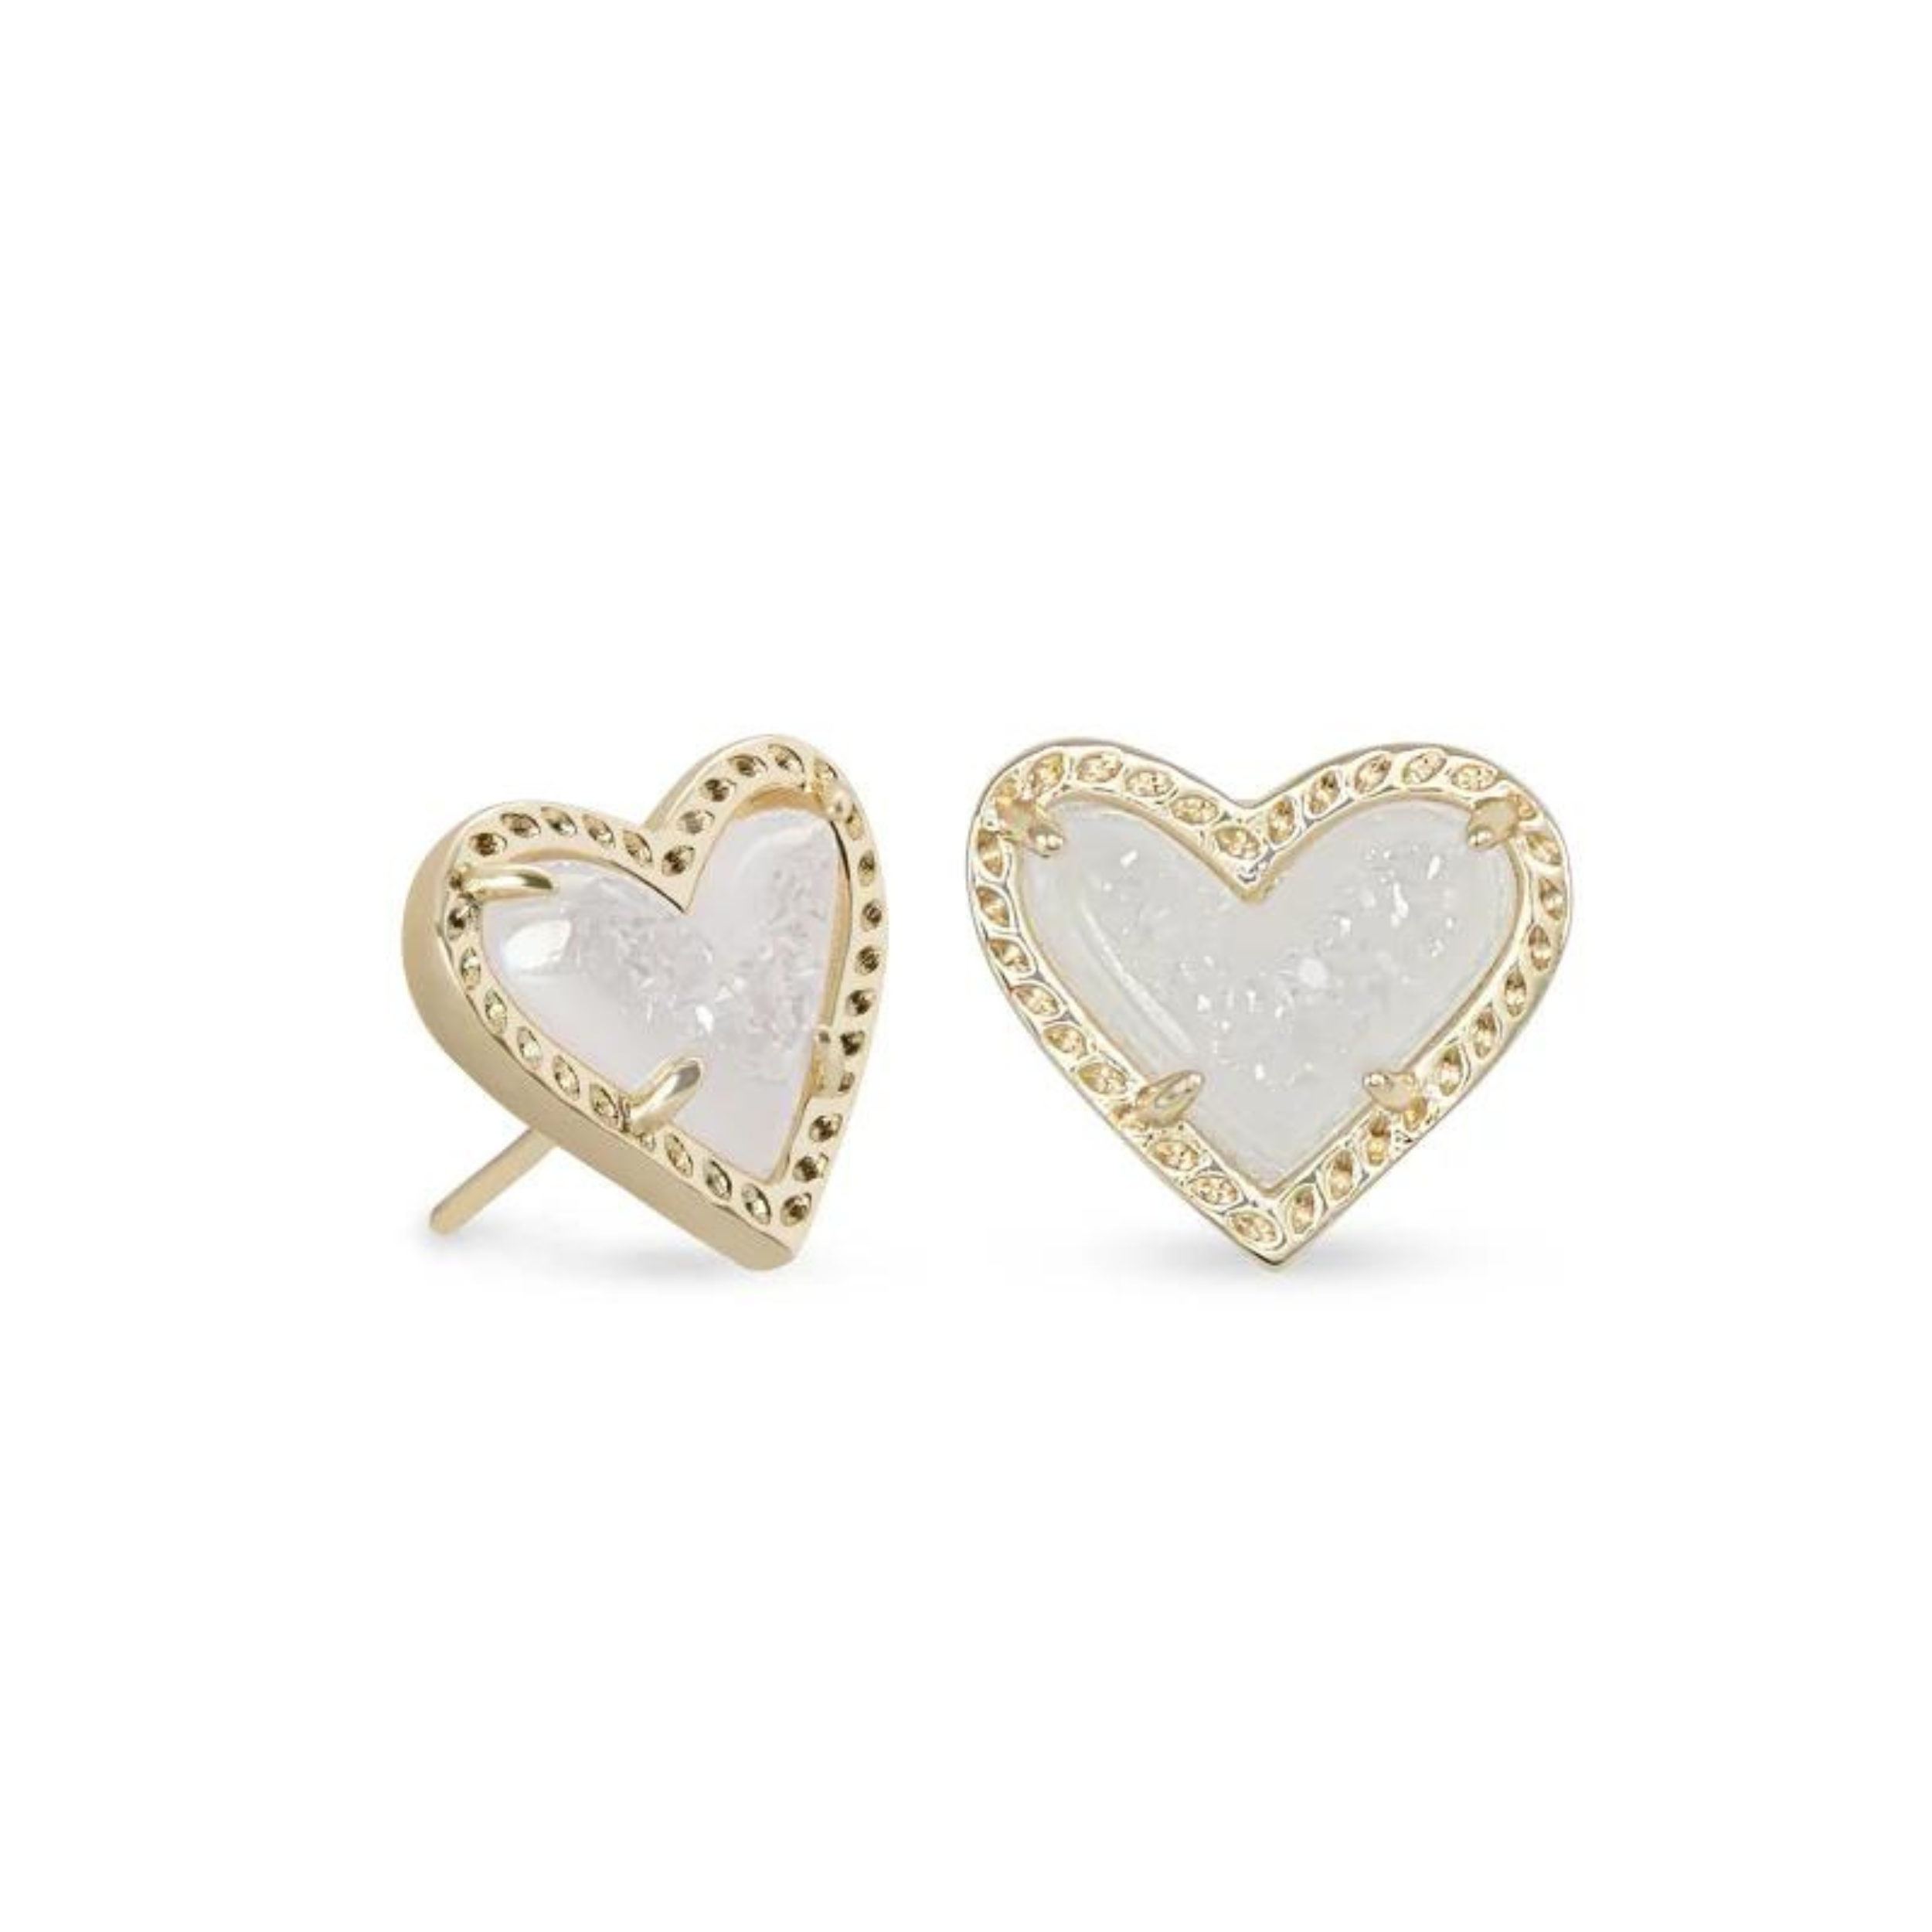 Gold and crustal heart shaped earrings pictured on a white background.